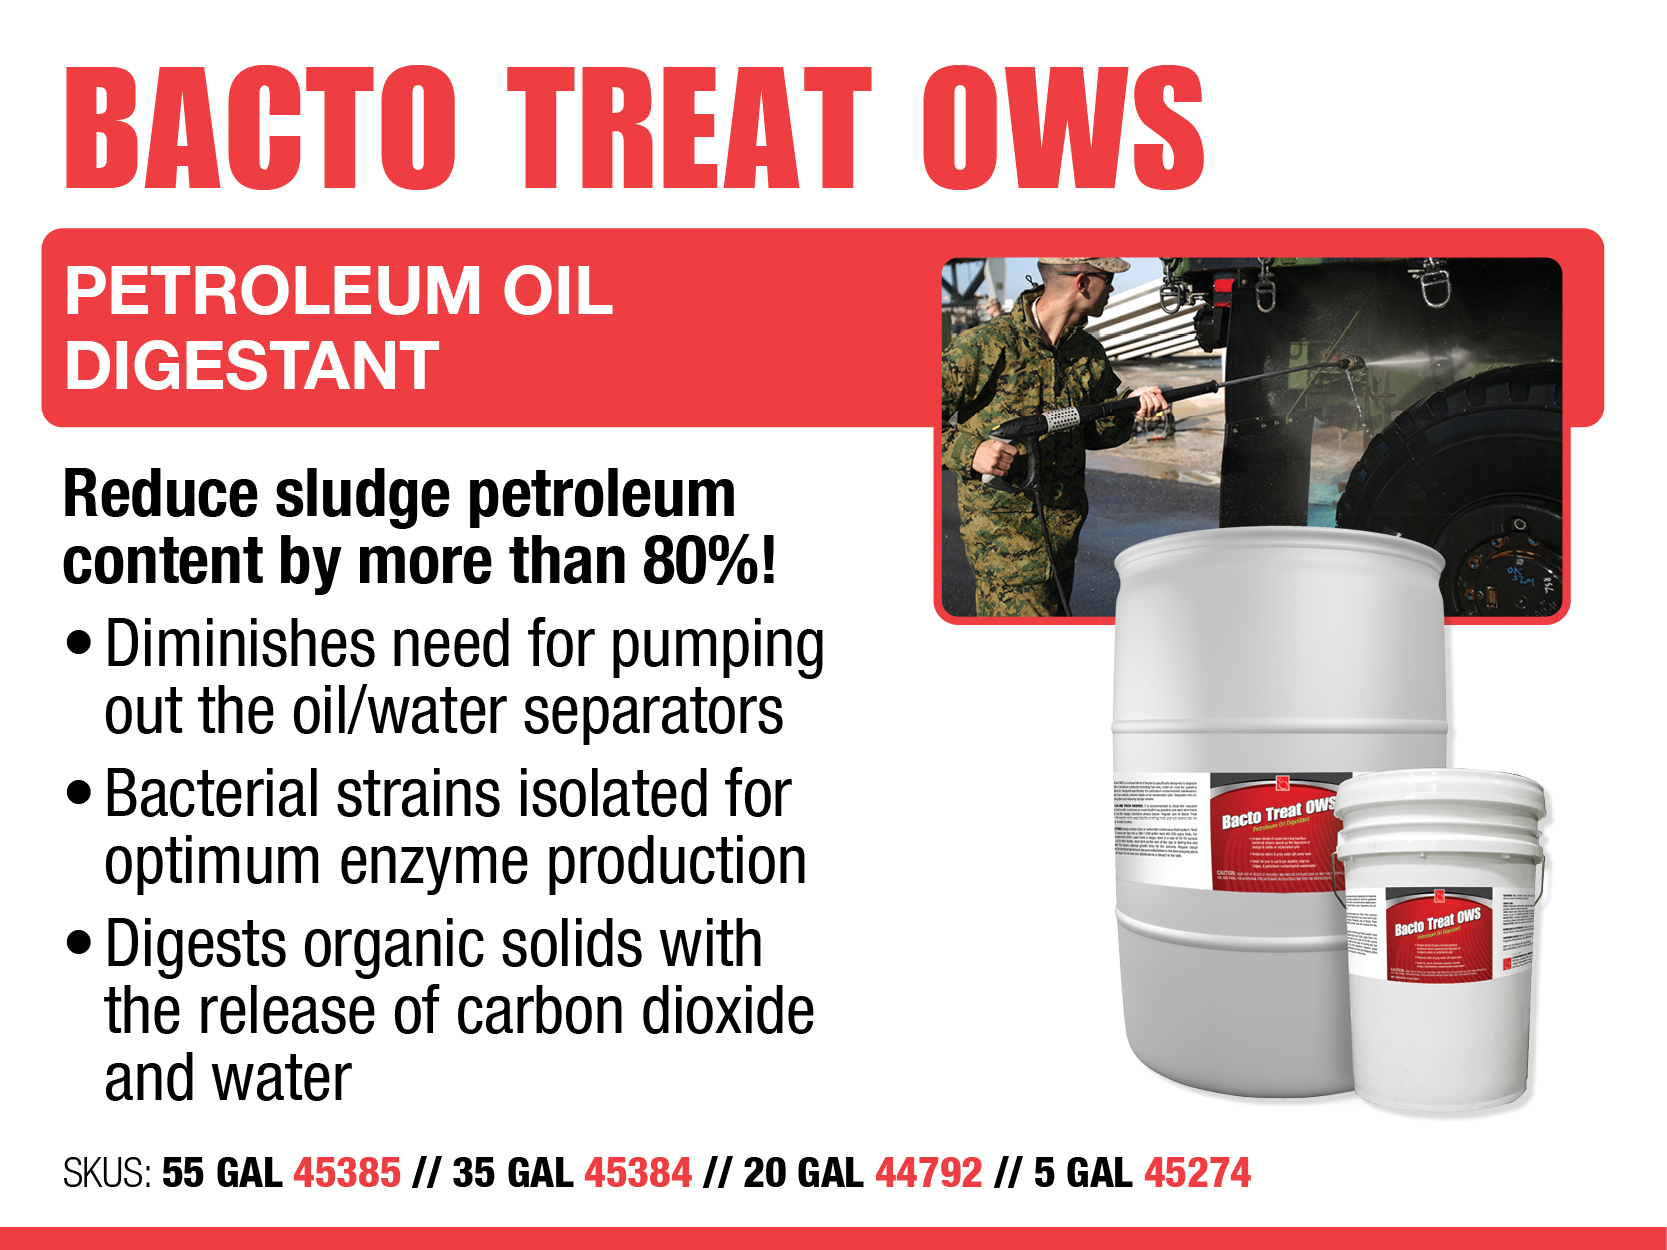 Bacto Treat OWS - Petroleum Oil Digestant - Wastewater Essentials  - Collections, Plants, and Lagoons - Wastewater Treatment